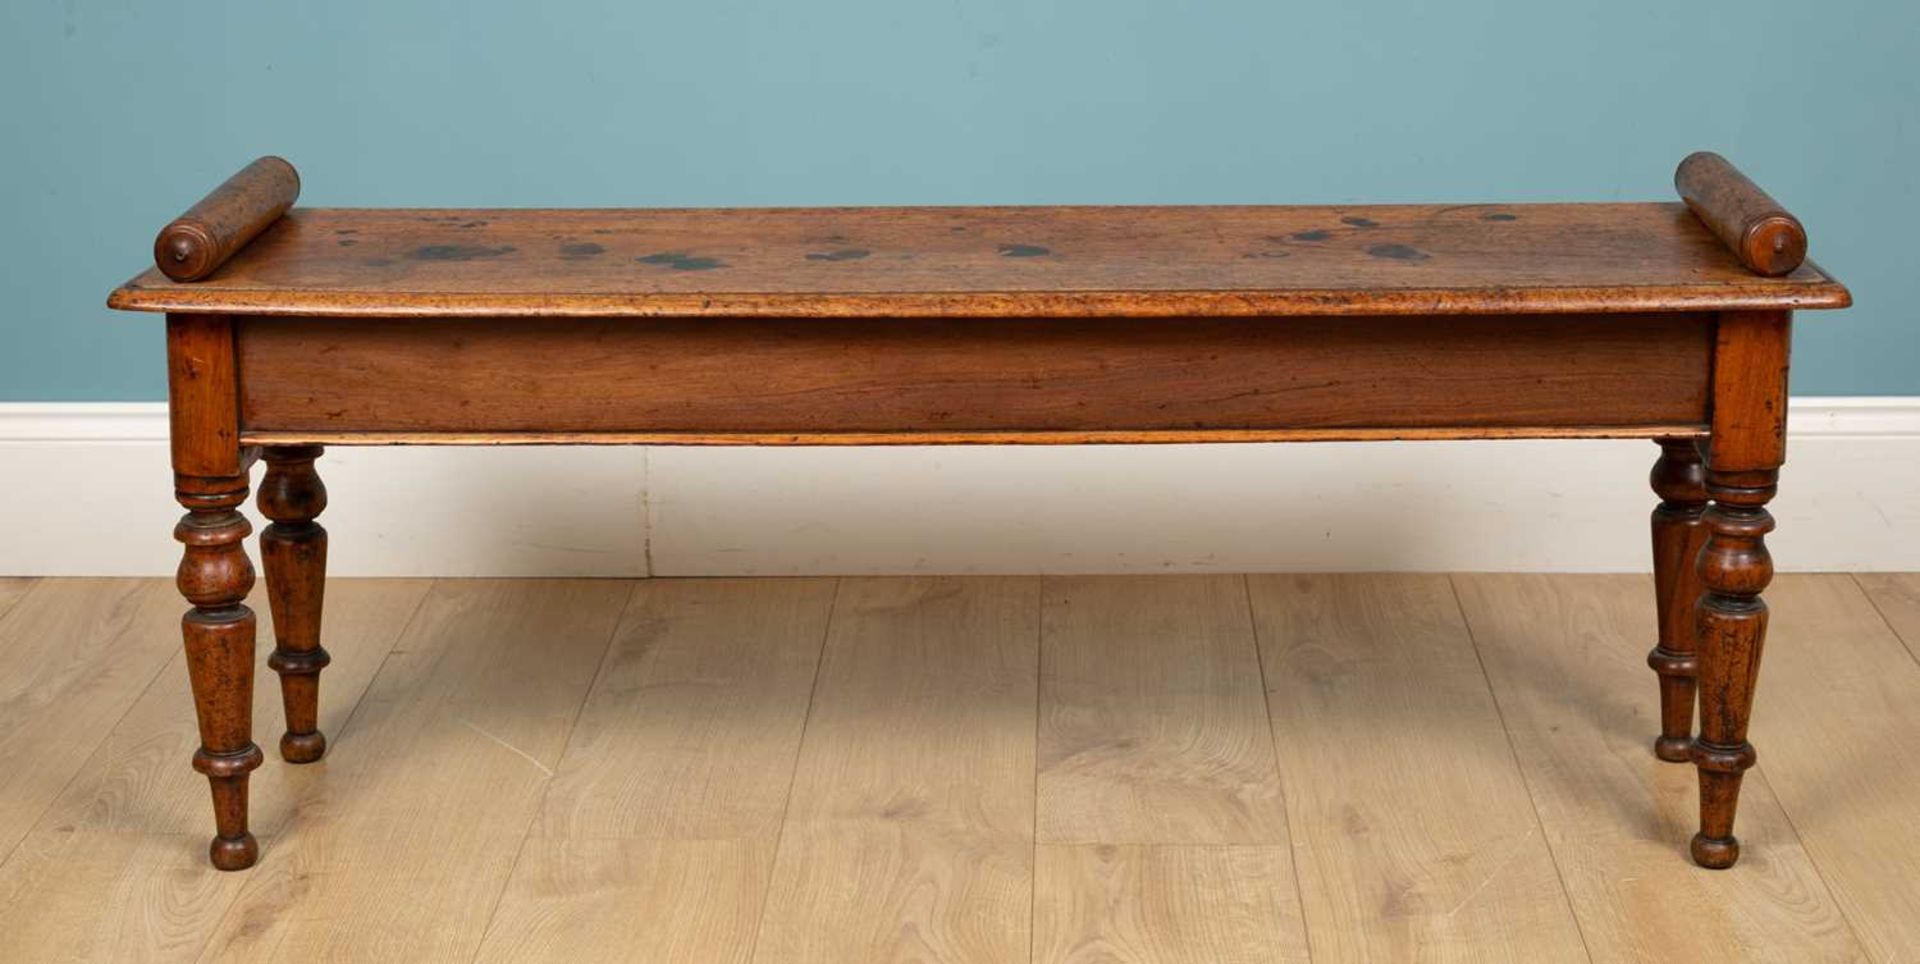 A mid-Victorian mahogany hall bench or window seat - Image 2 of 3